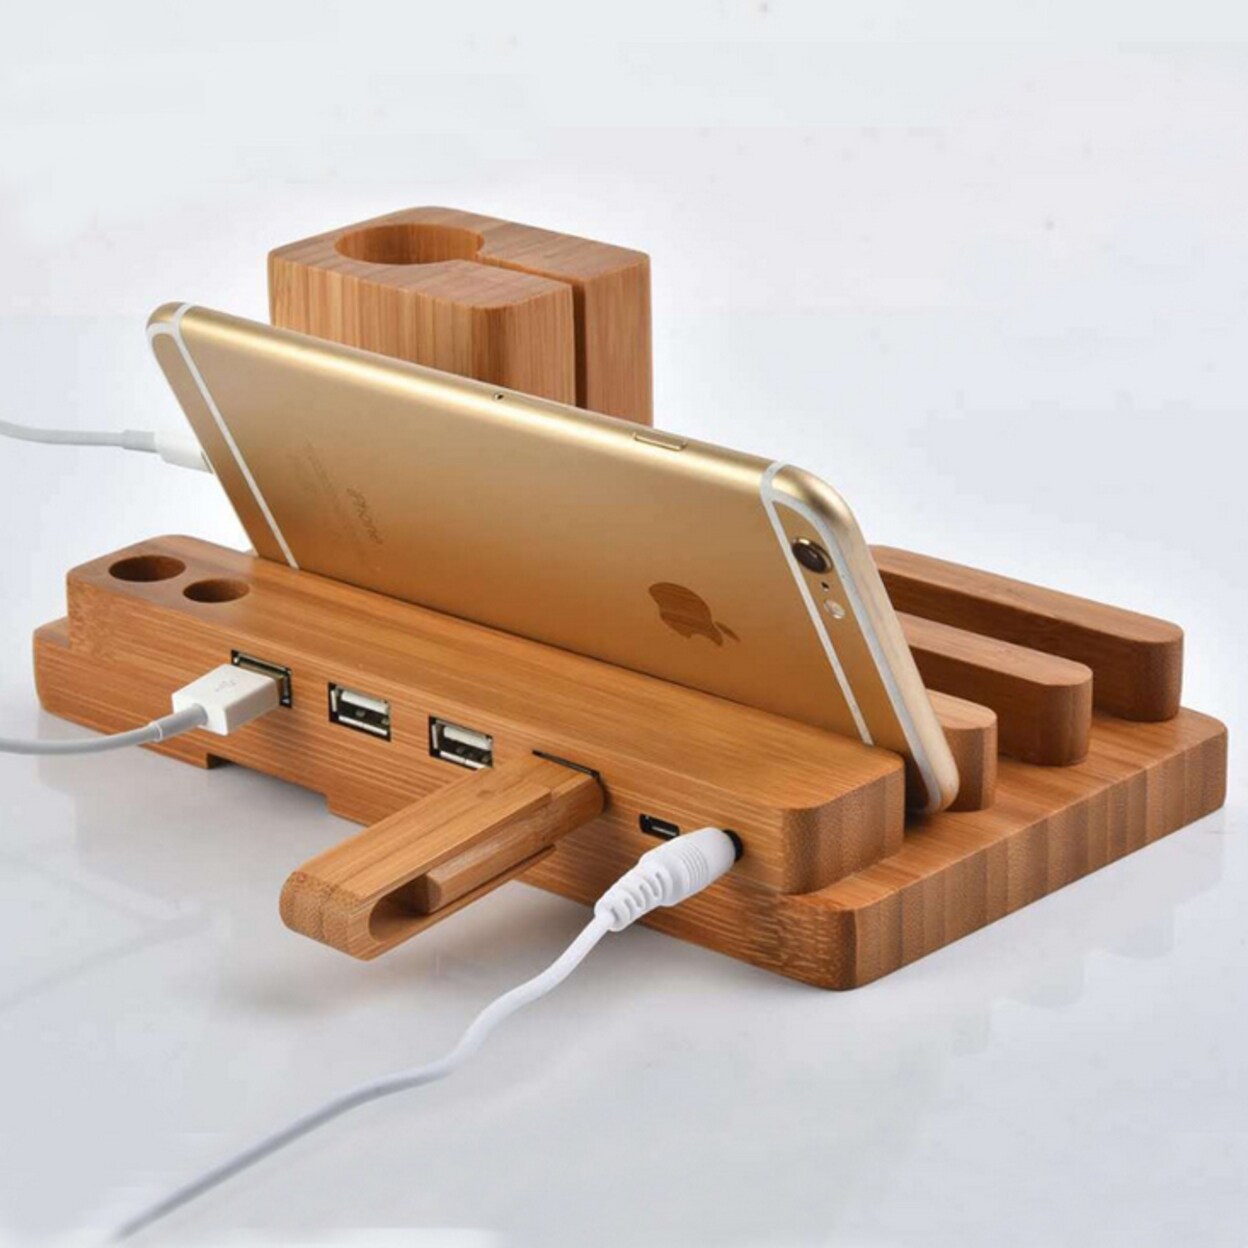 Shop Usb Charger With Apple Watch Phone Organizer Stand Cradle Holder Desktop Bamboo Wood Charging Station For Iphone Overstock 23087694,Aesthetic Black And White Iphone 11 Wallpaper